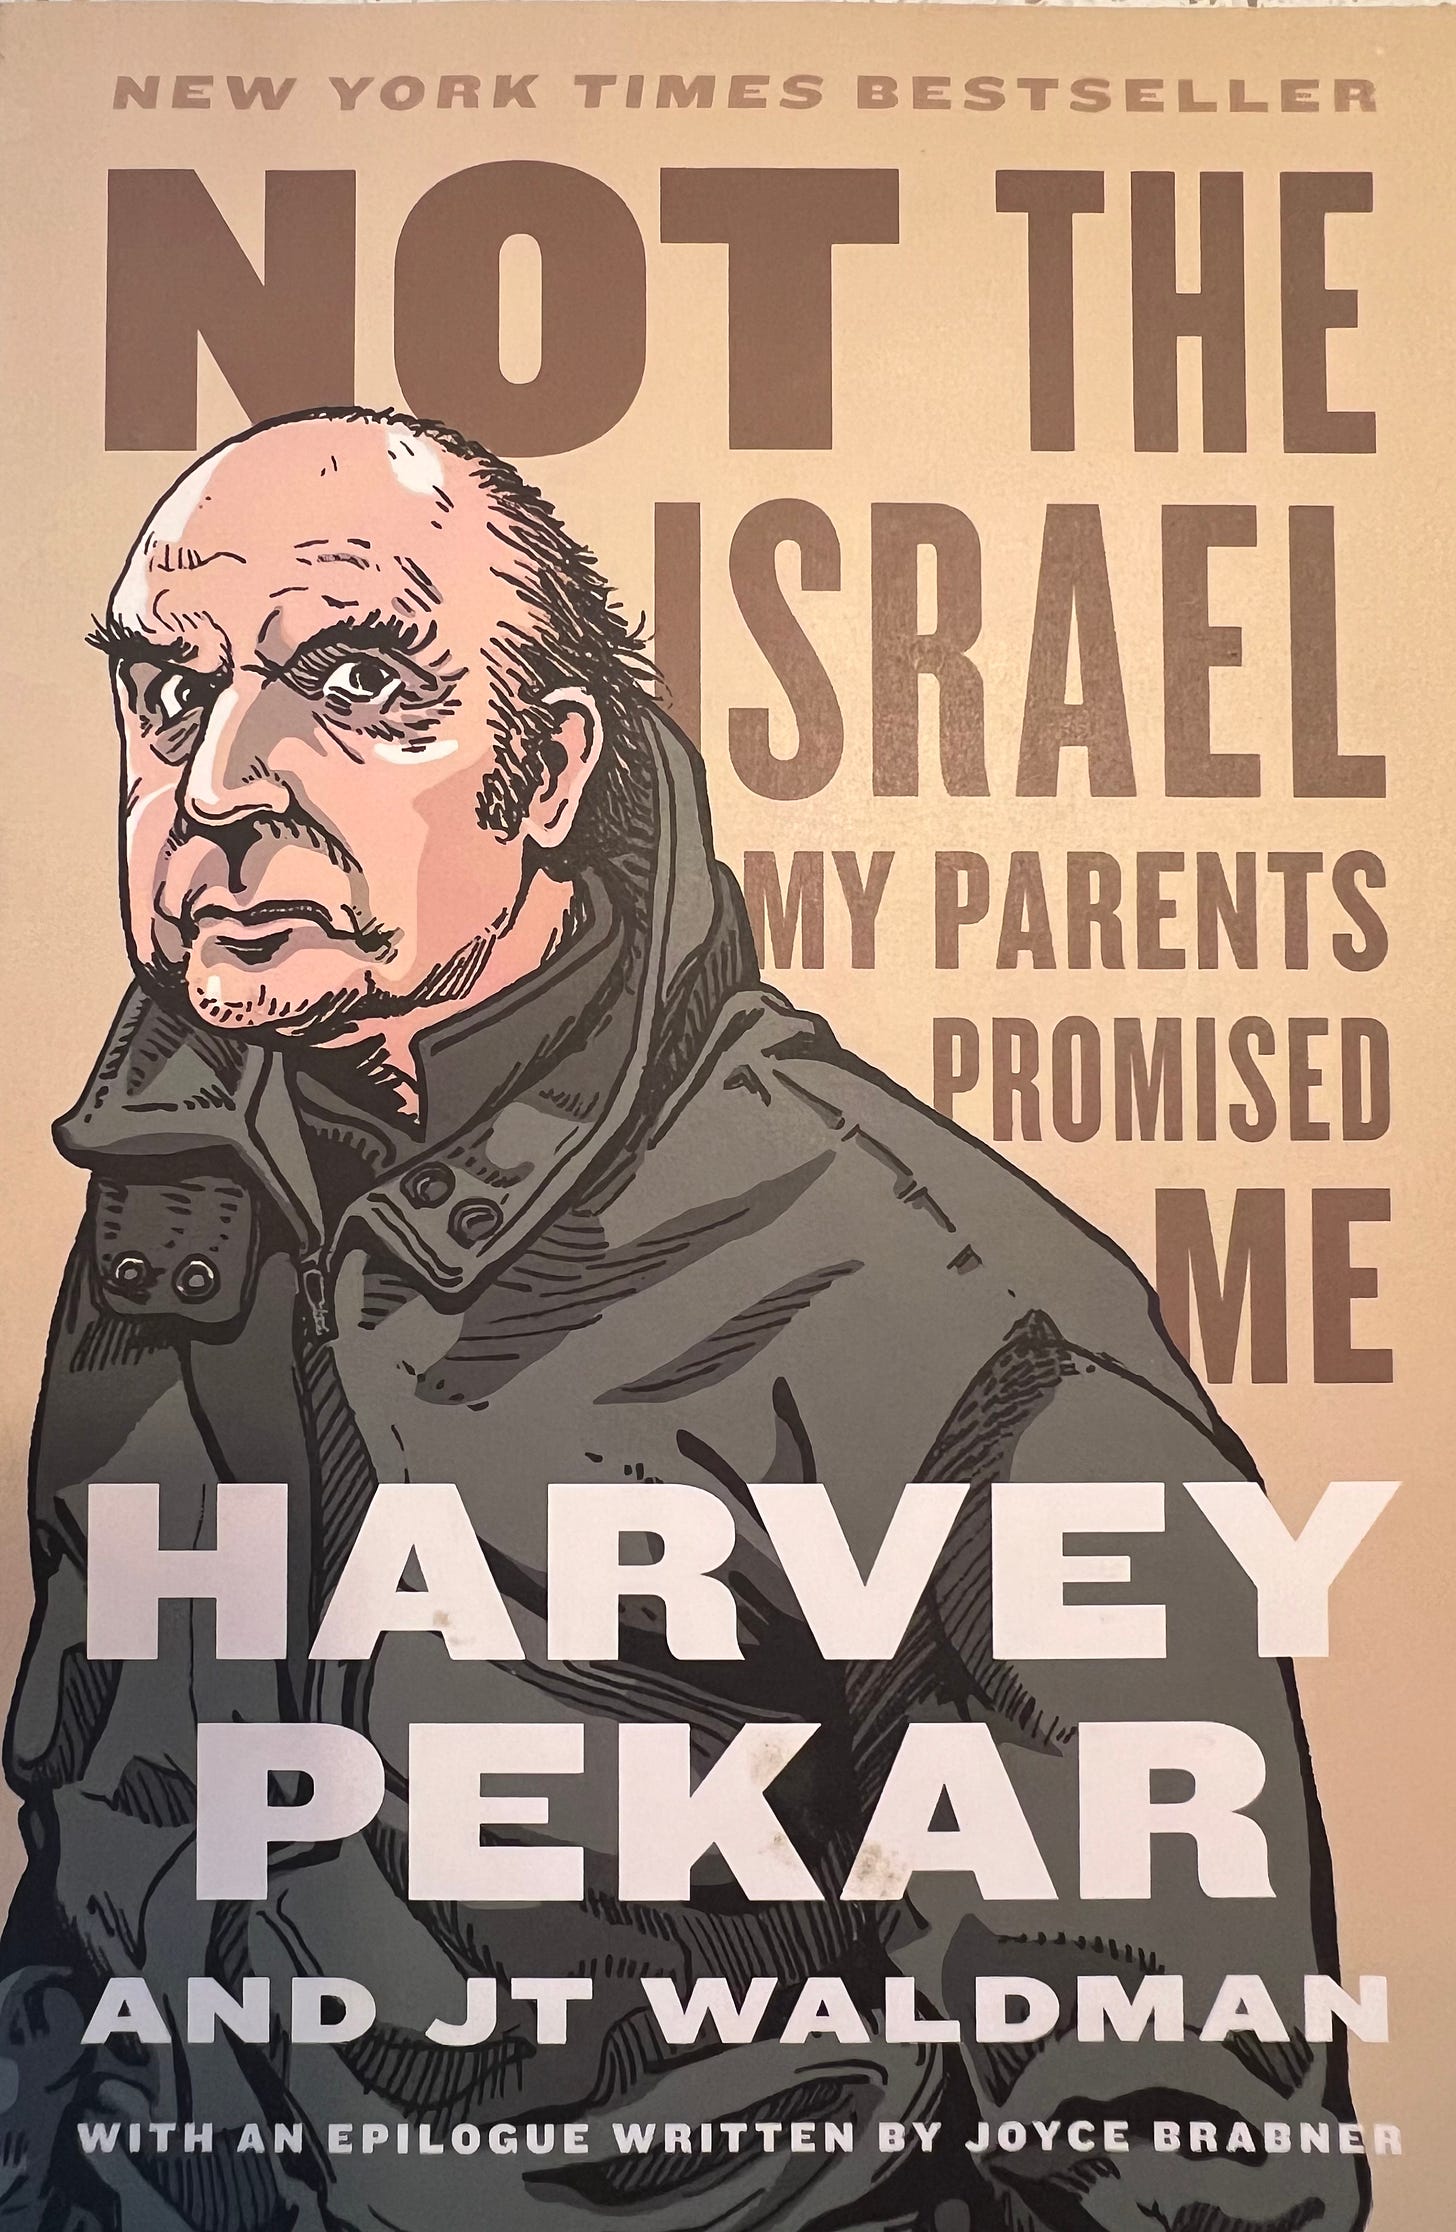 the cover of the New York Times Bestseller "Not the Isreal my Parents Promised Me" by Harvey Pekar